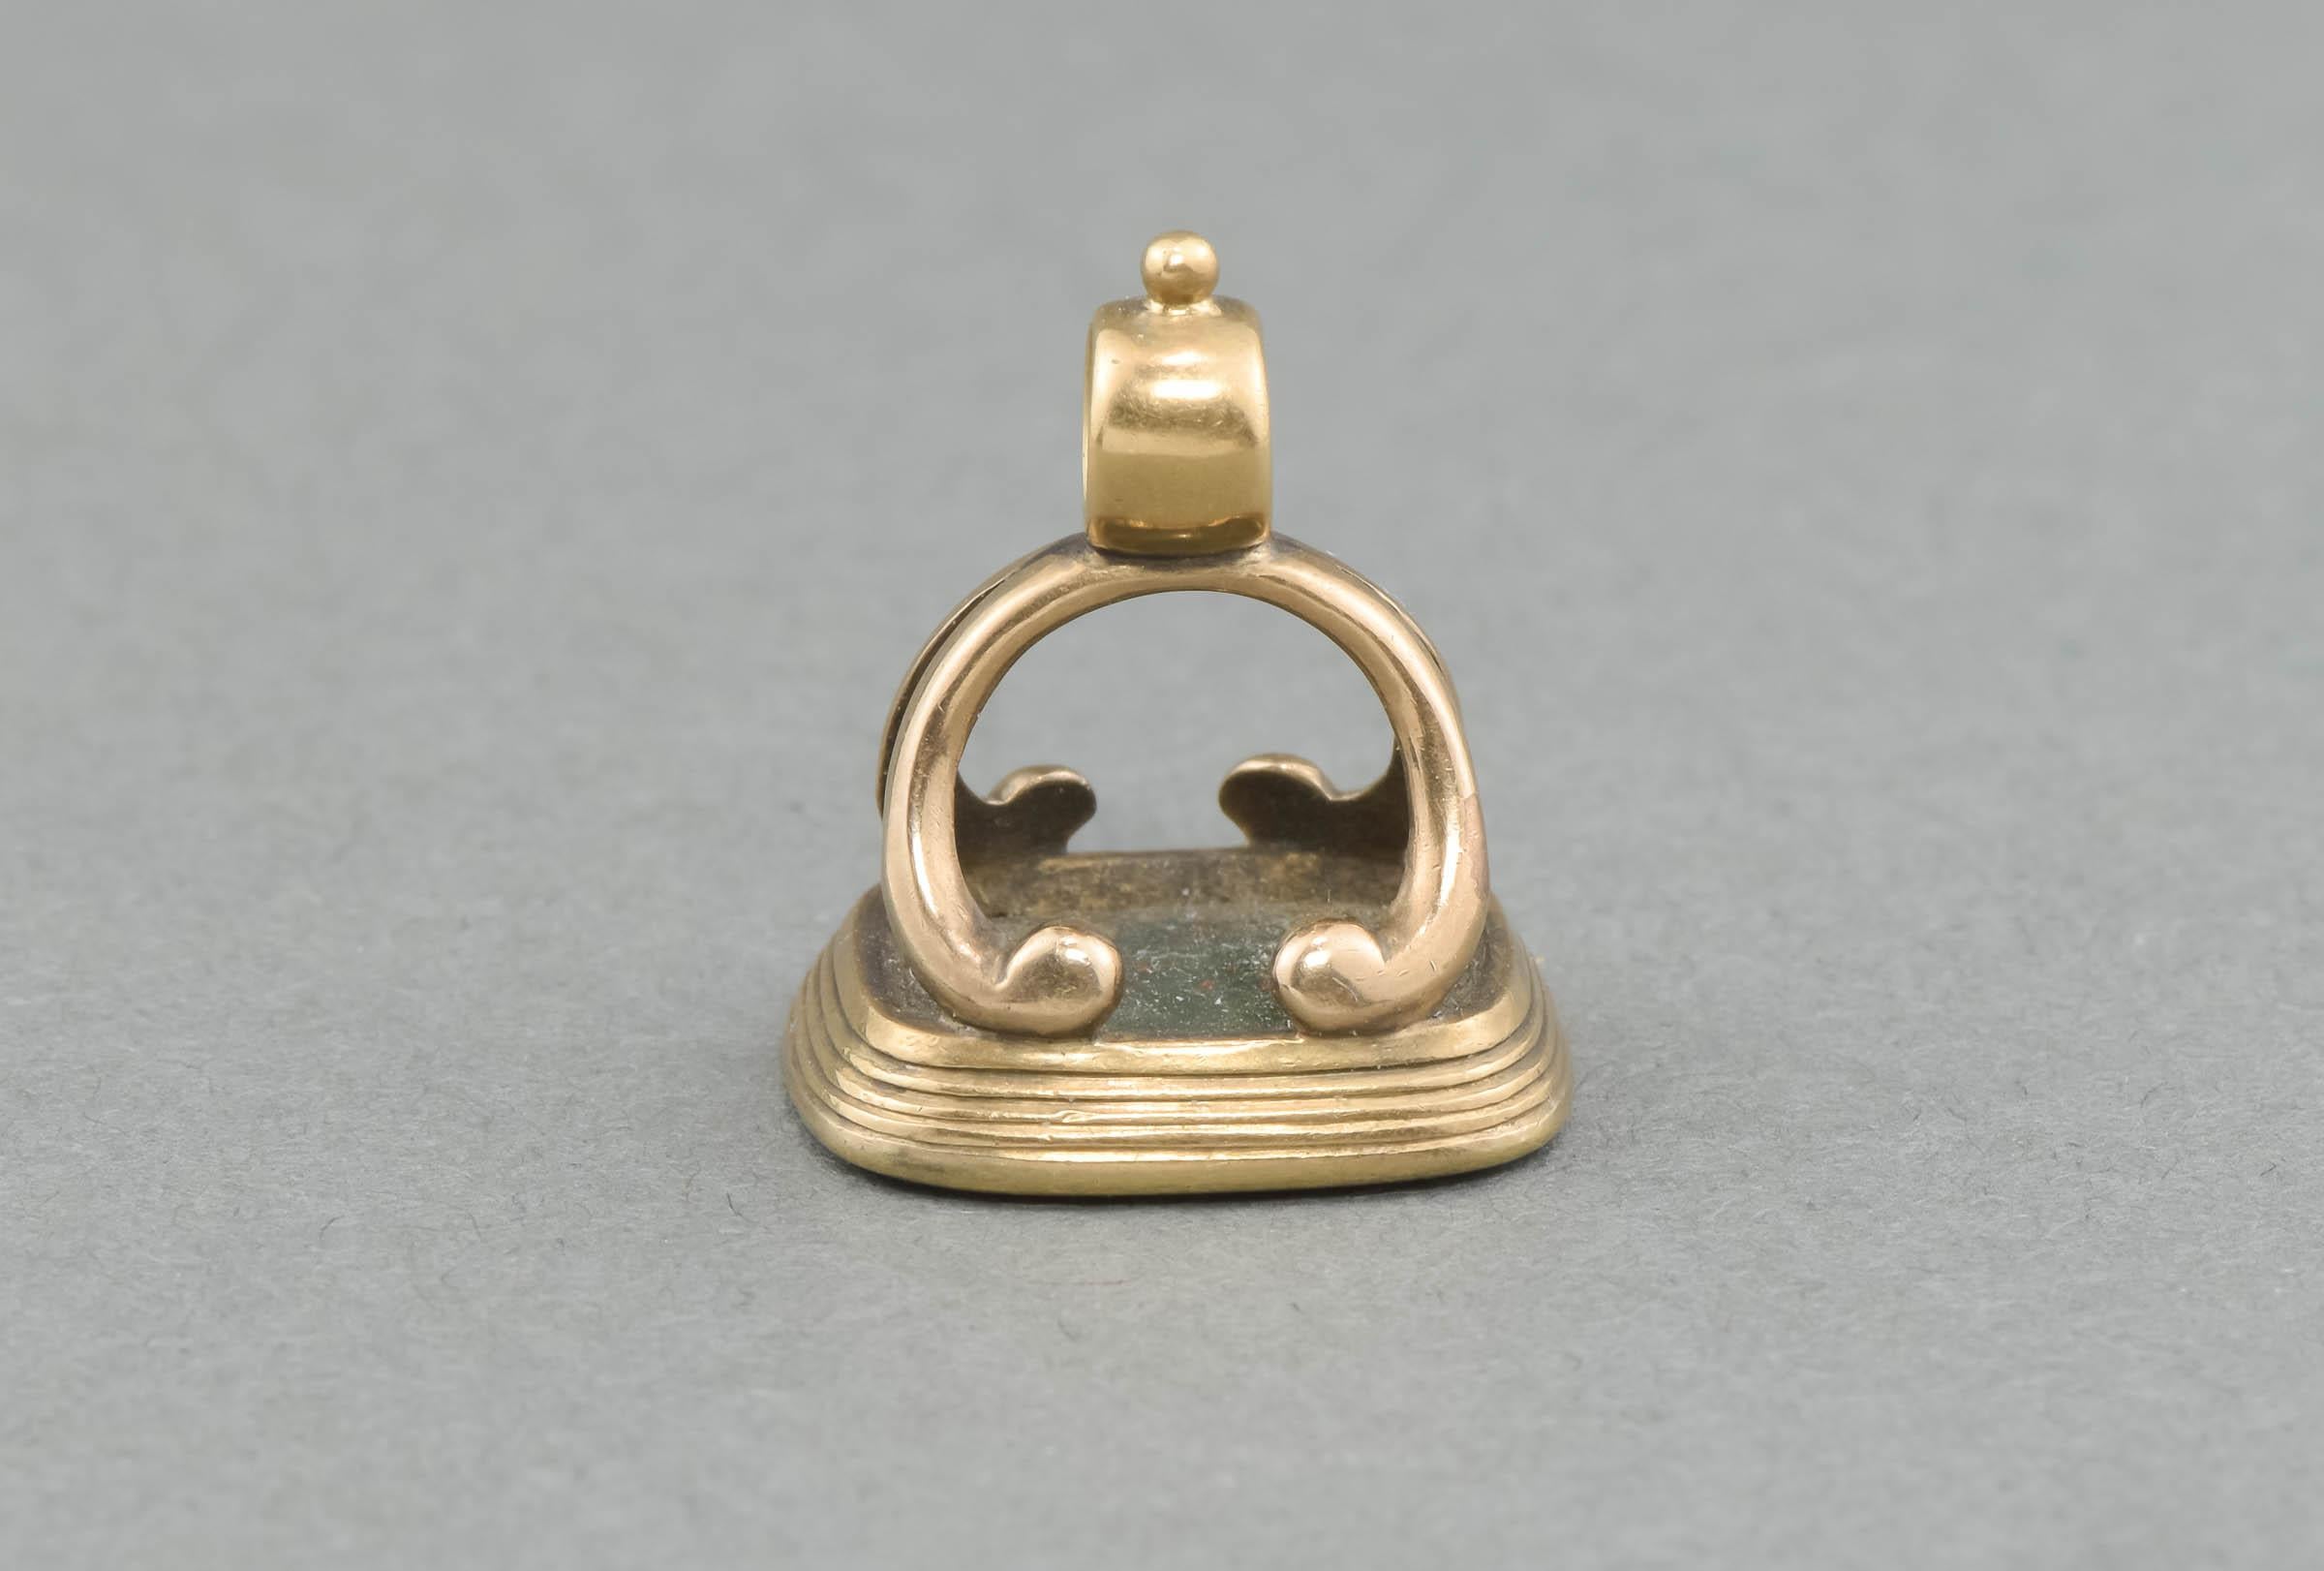 Crafted of solid 10K gold, the fob features a classic early design, with a still crisply carved bloodstone intaglio. The carving depicts a swan sitting on a crown, above the monogram or initials of 